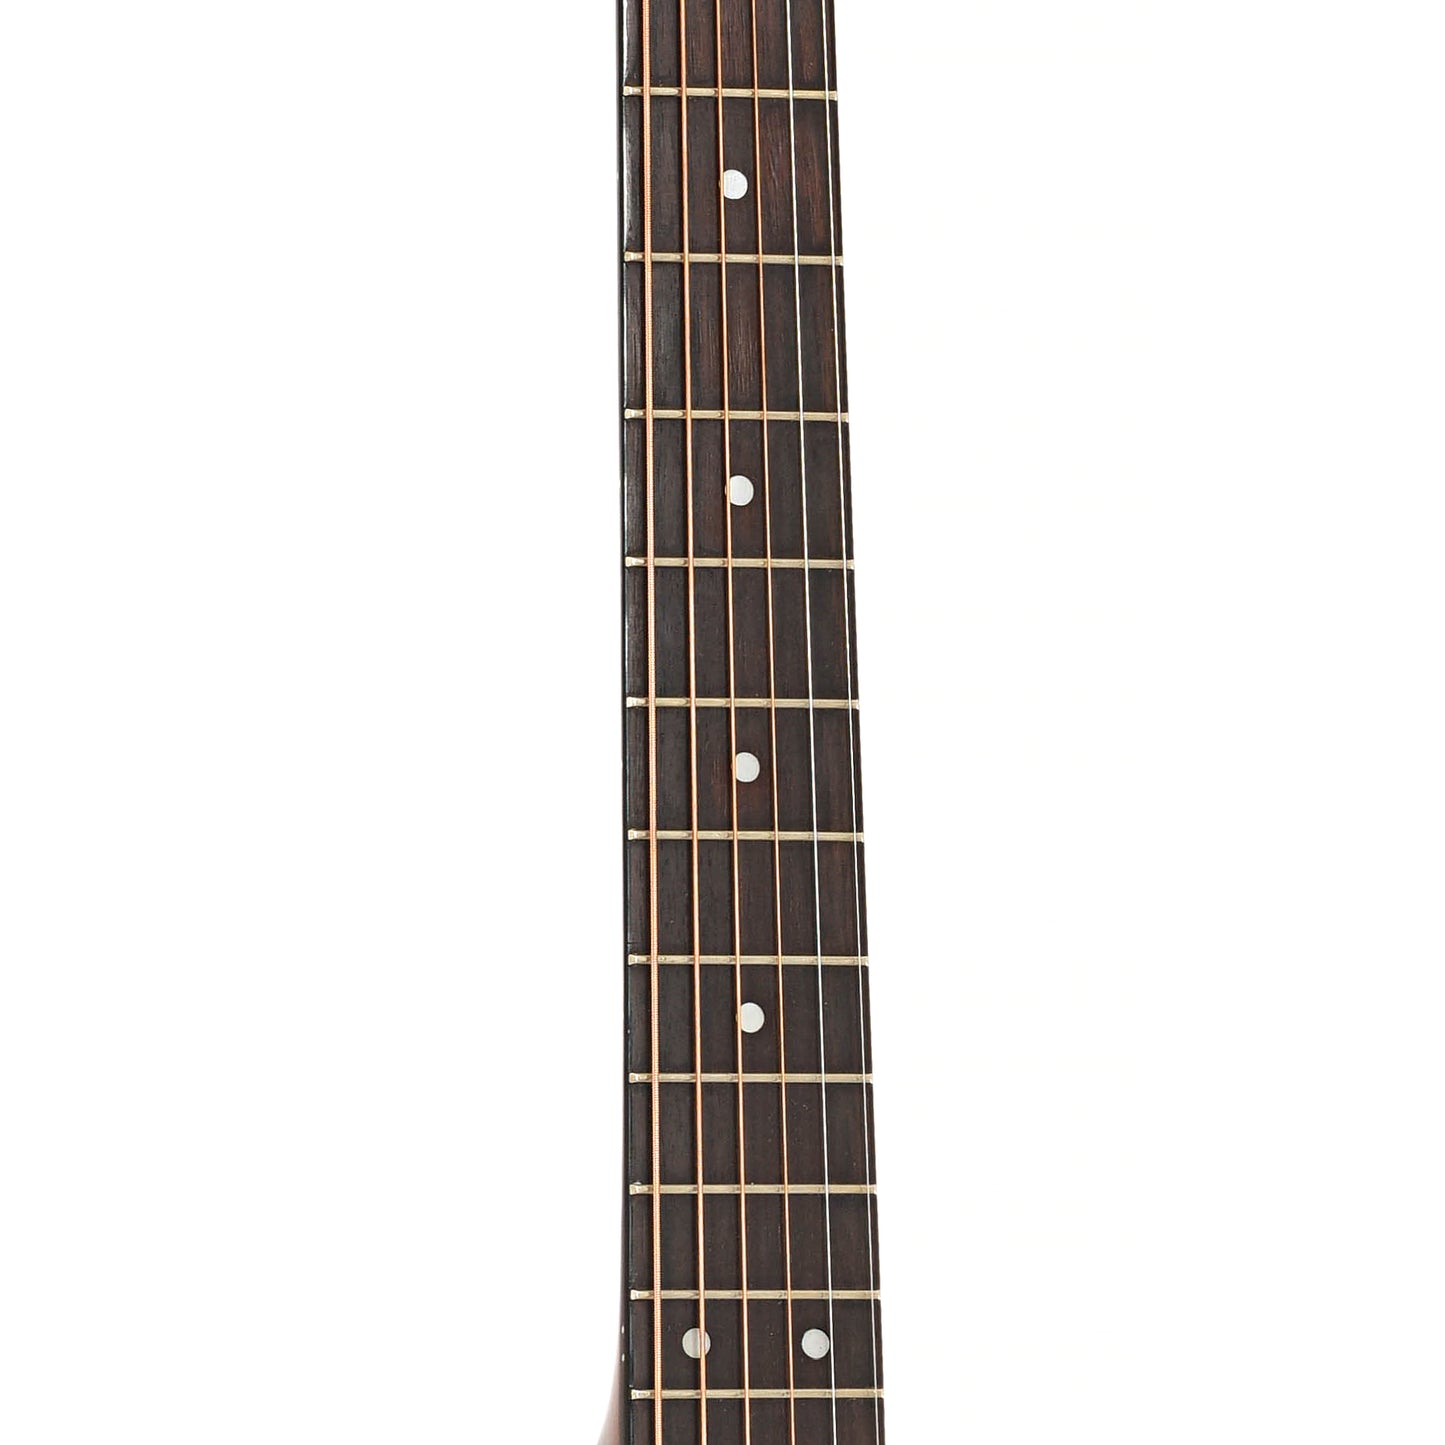 Fretboard of Ibanez Artwood AW10-CE Acoustic-Electric Guitar (2000)